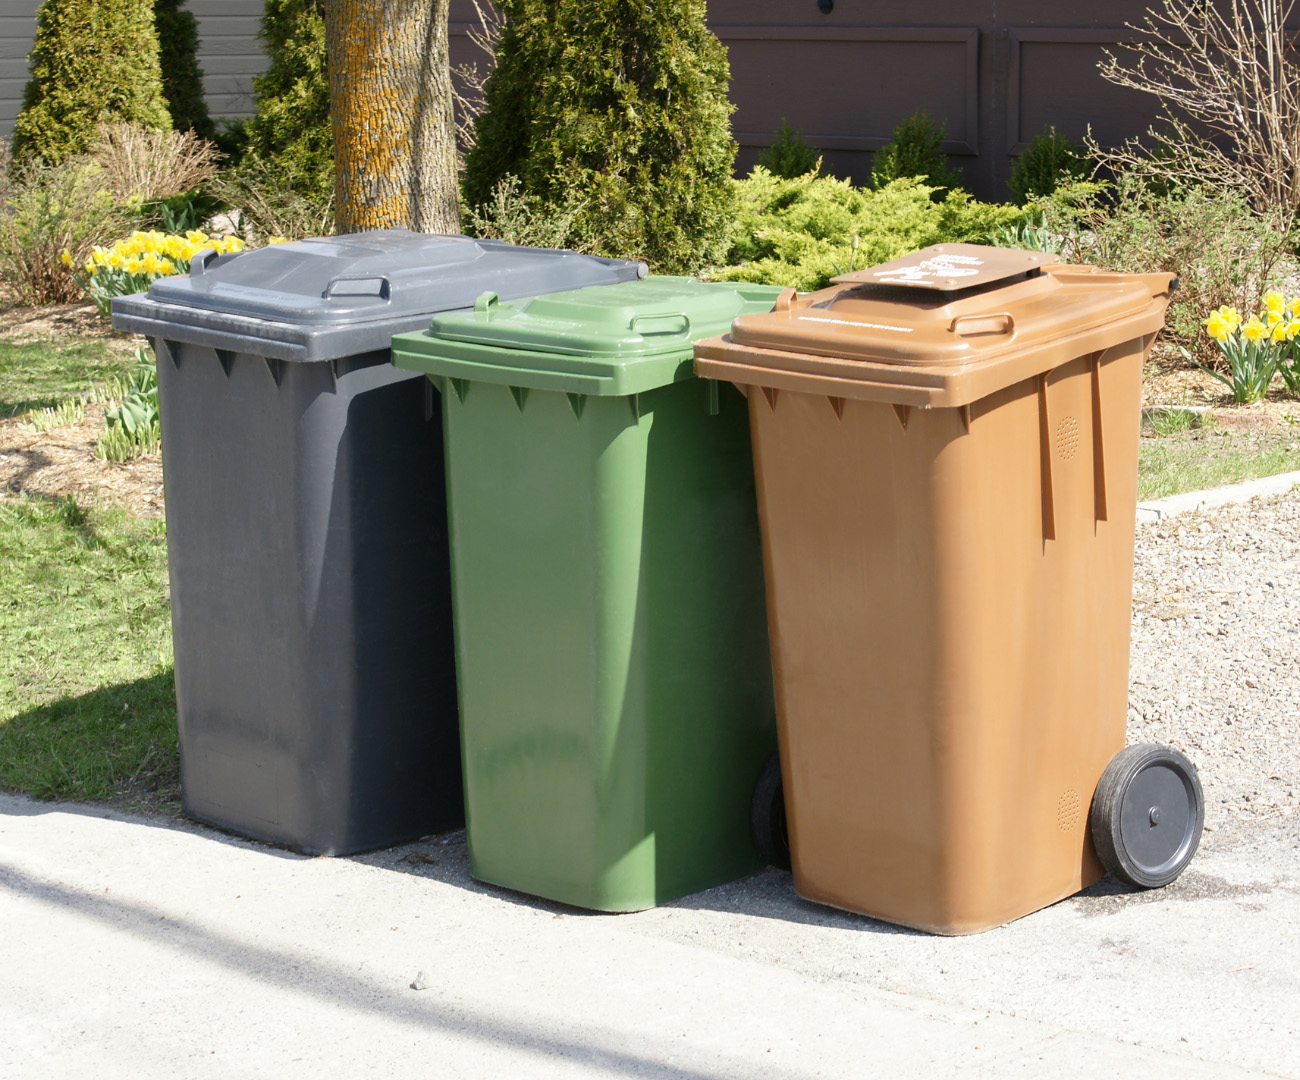 An image of bins at the bottom of a driveway